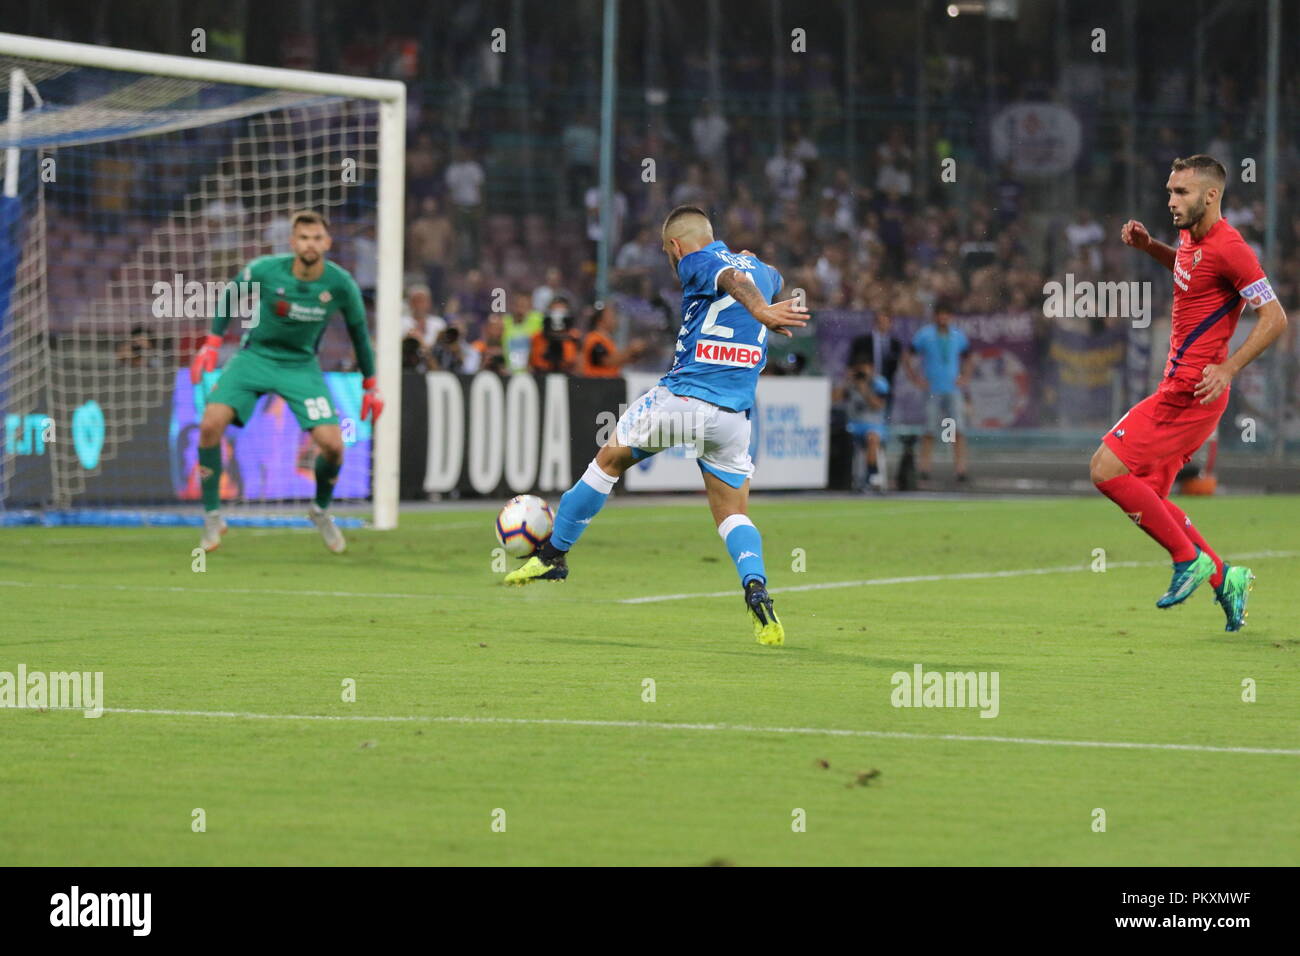 Naples, Italy. 15th September 2018. In the picture the player of Napoli and Italian football national Lorenzo Insigne who pulls to score.Stadium San Paolo Naples. 15th Sep, 2018. 09/15/2018 - Italy.final result SSC Napoli 1 AC Fiorentina 0. Credit: Fabio Sasso/ZUMA Wire/Alamy Live News Stock Photo